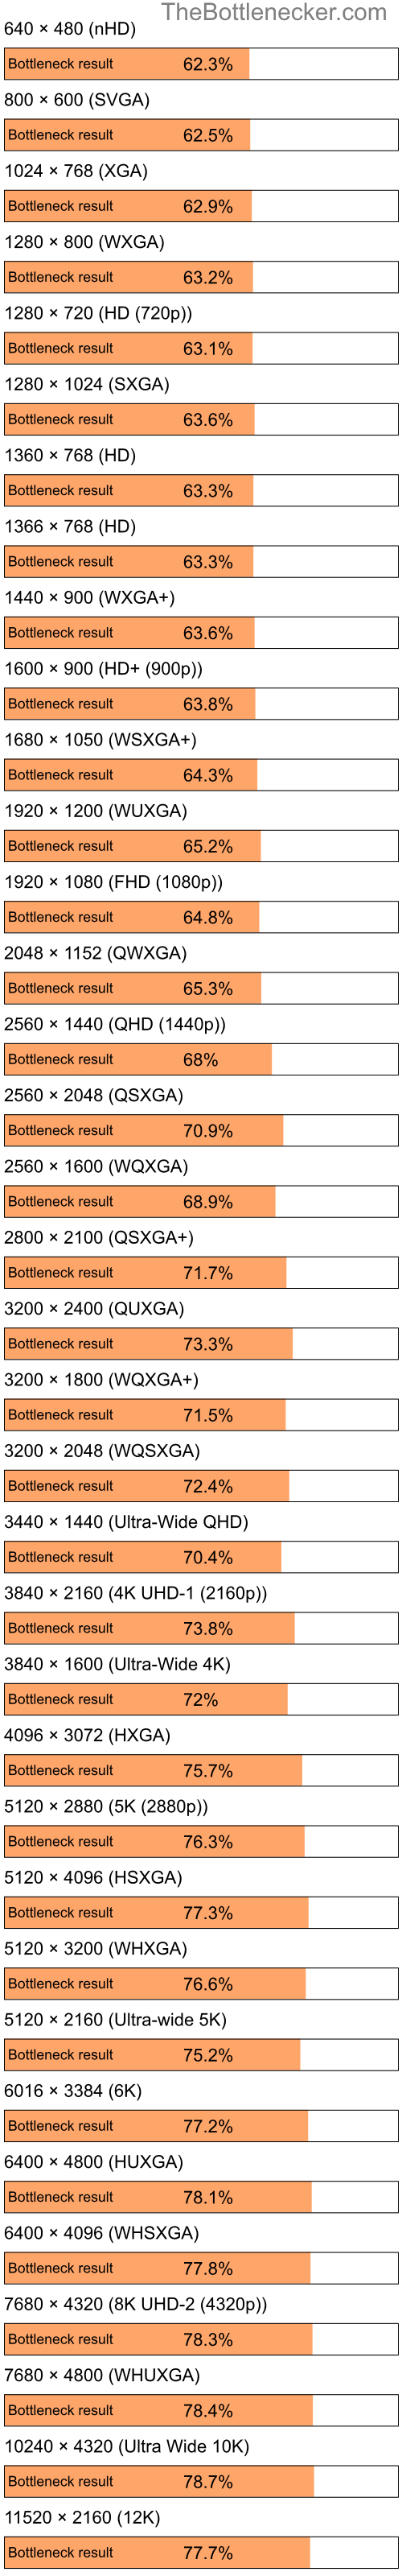 Bottleneck results by resolution for Intel Pentium 4 and AMD Mobility Radeon X700 in Processor Intense Tasks